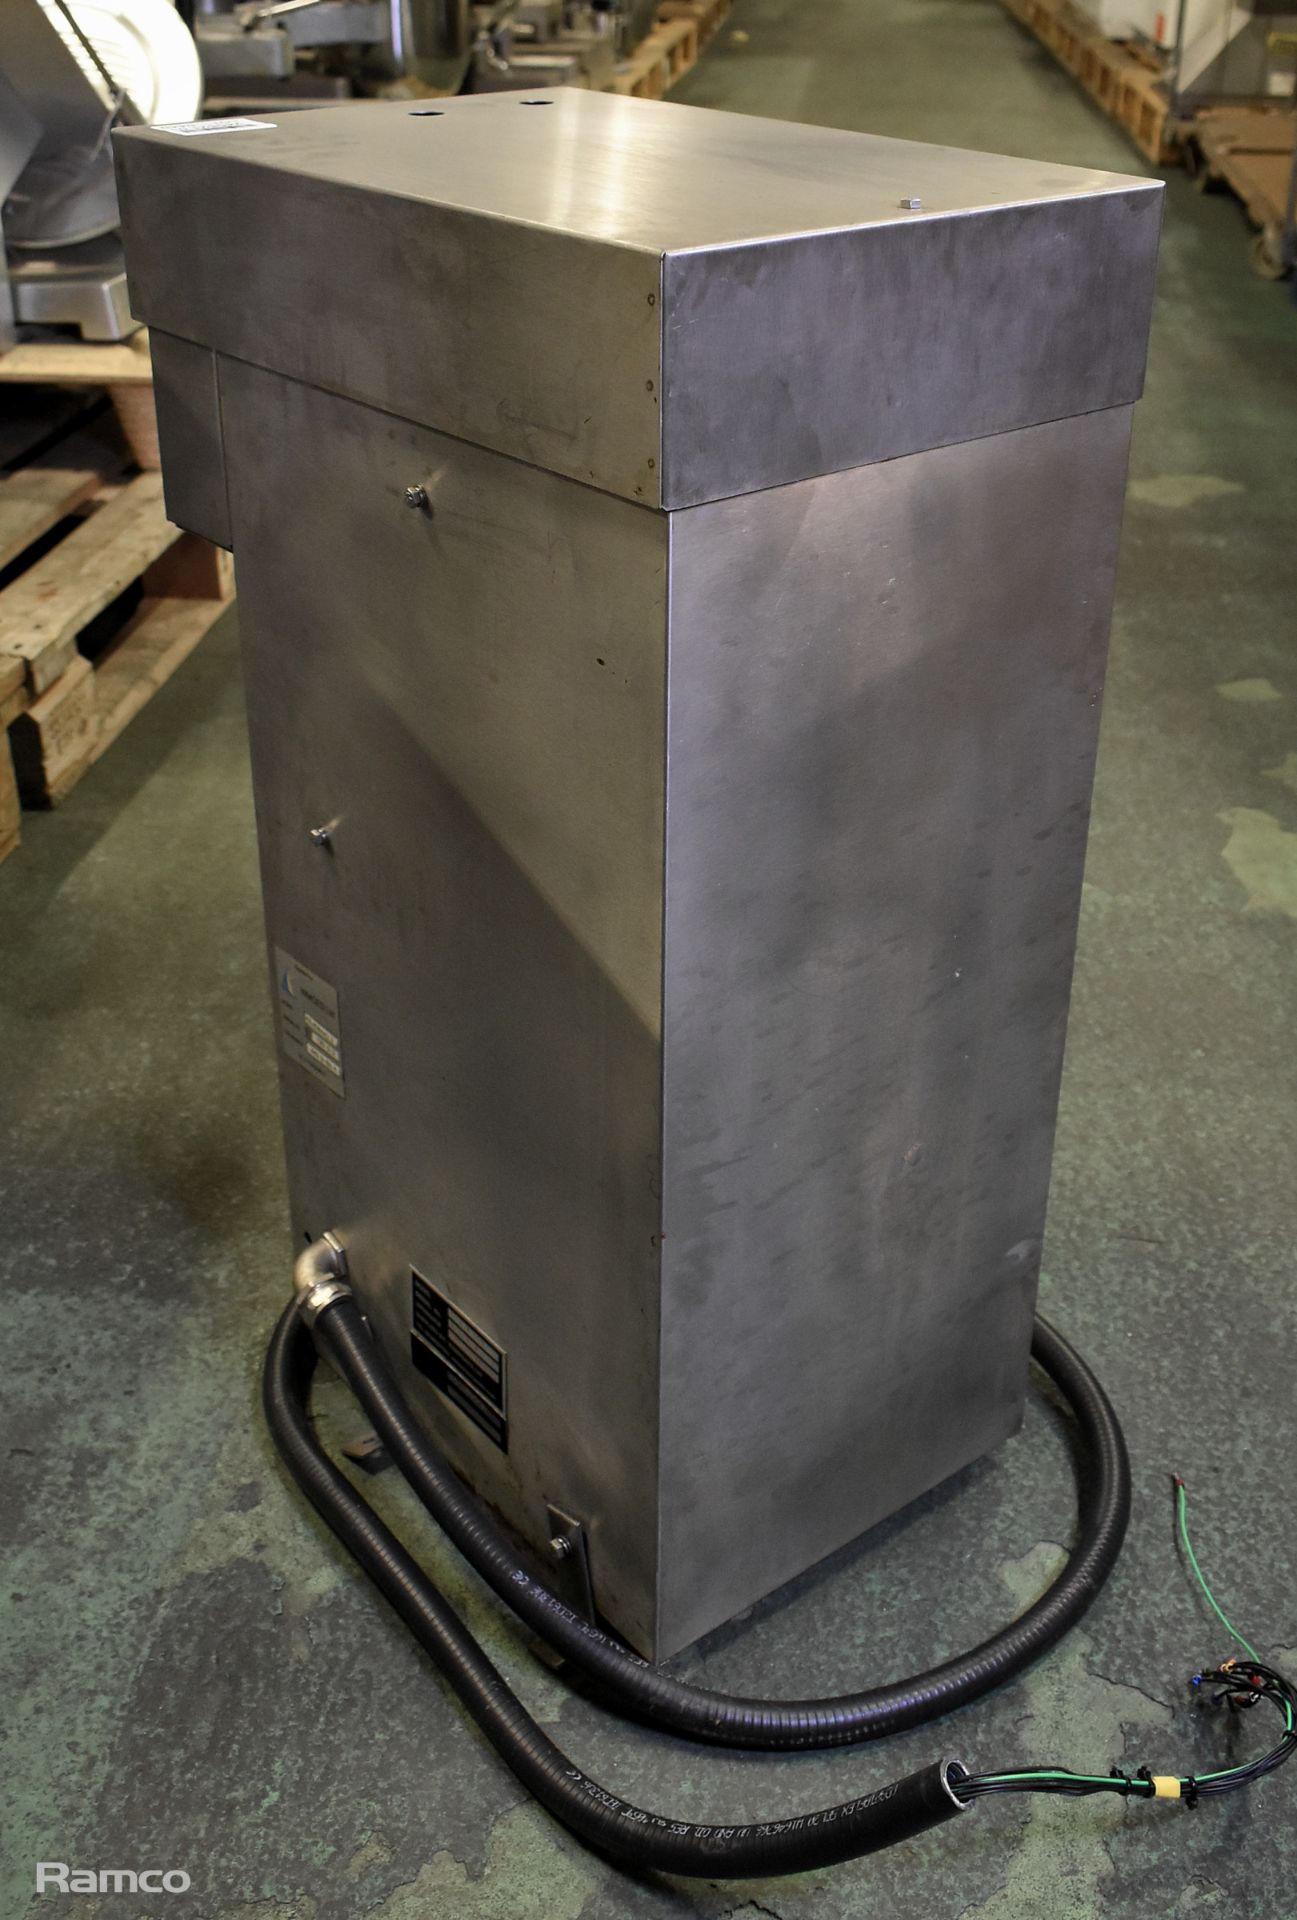 Kempsafe KSJEM440/3 stainless steel continuous water boiler/heater - Missing tap - 440V - 3ph - 60Hz - Image 5 of 5